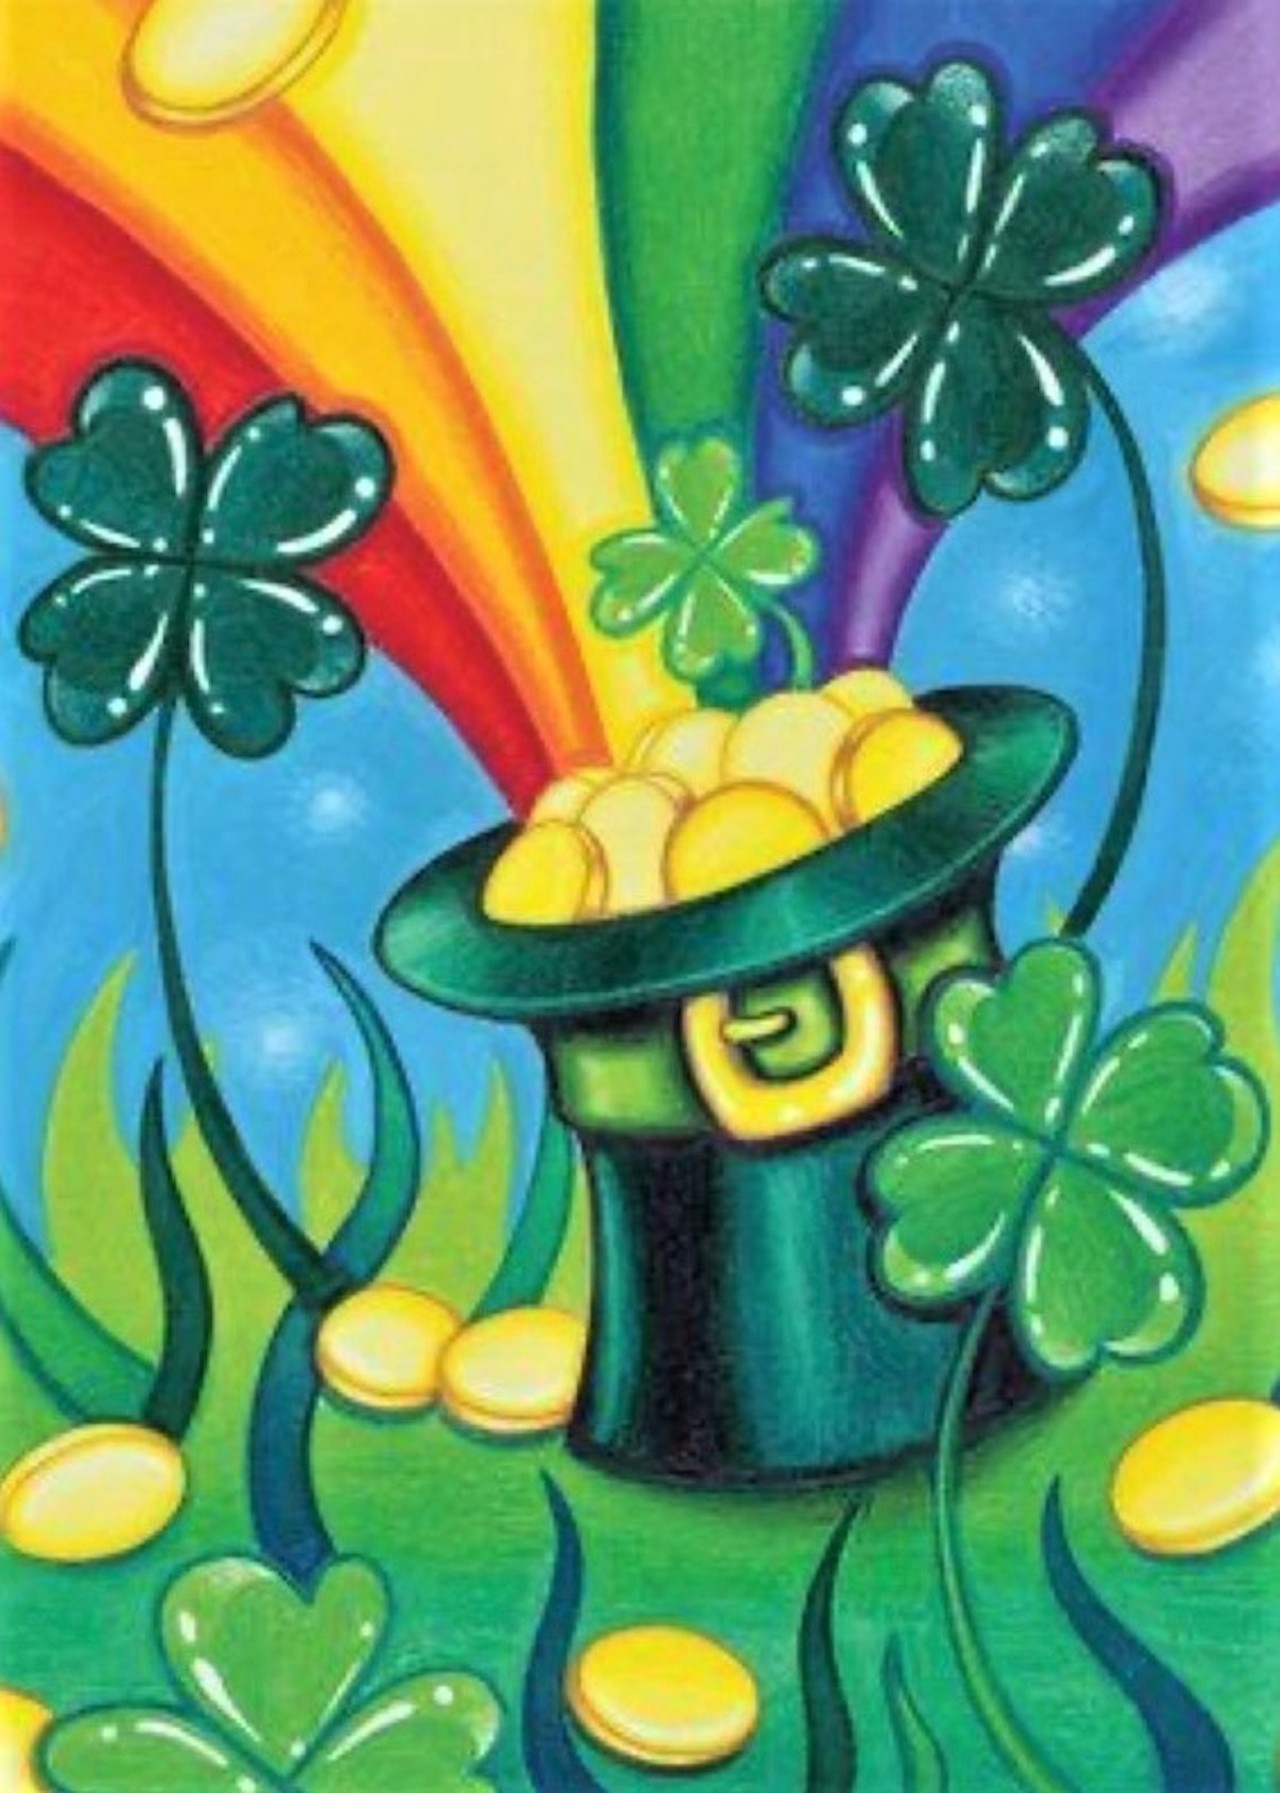 Make & Take: St. Patrick's Day Green Beer Painting Party
Artists will lead you in creating a painting featuring the end of a rainbow in honor of St. Patrick’s Day. Supplies will be provided for everyone, and you can also bring your own snacks and drinks, which organizers will help you turn green. Art Central Foundation, 4 N. Main St., Middletown; Friday, March 17, 5:30-8:30 p.m.; $35